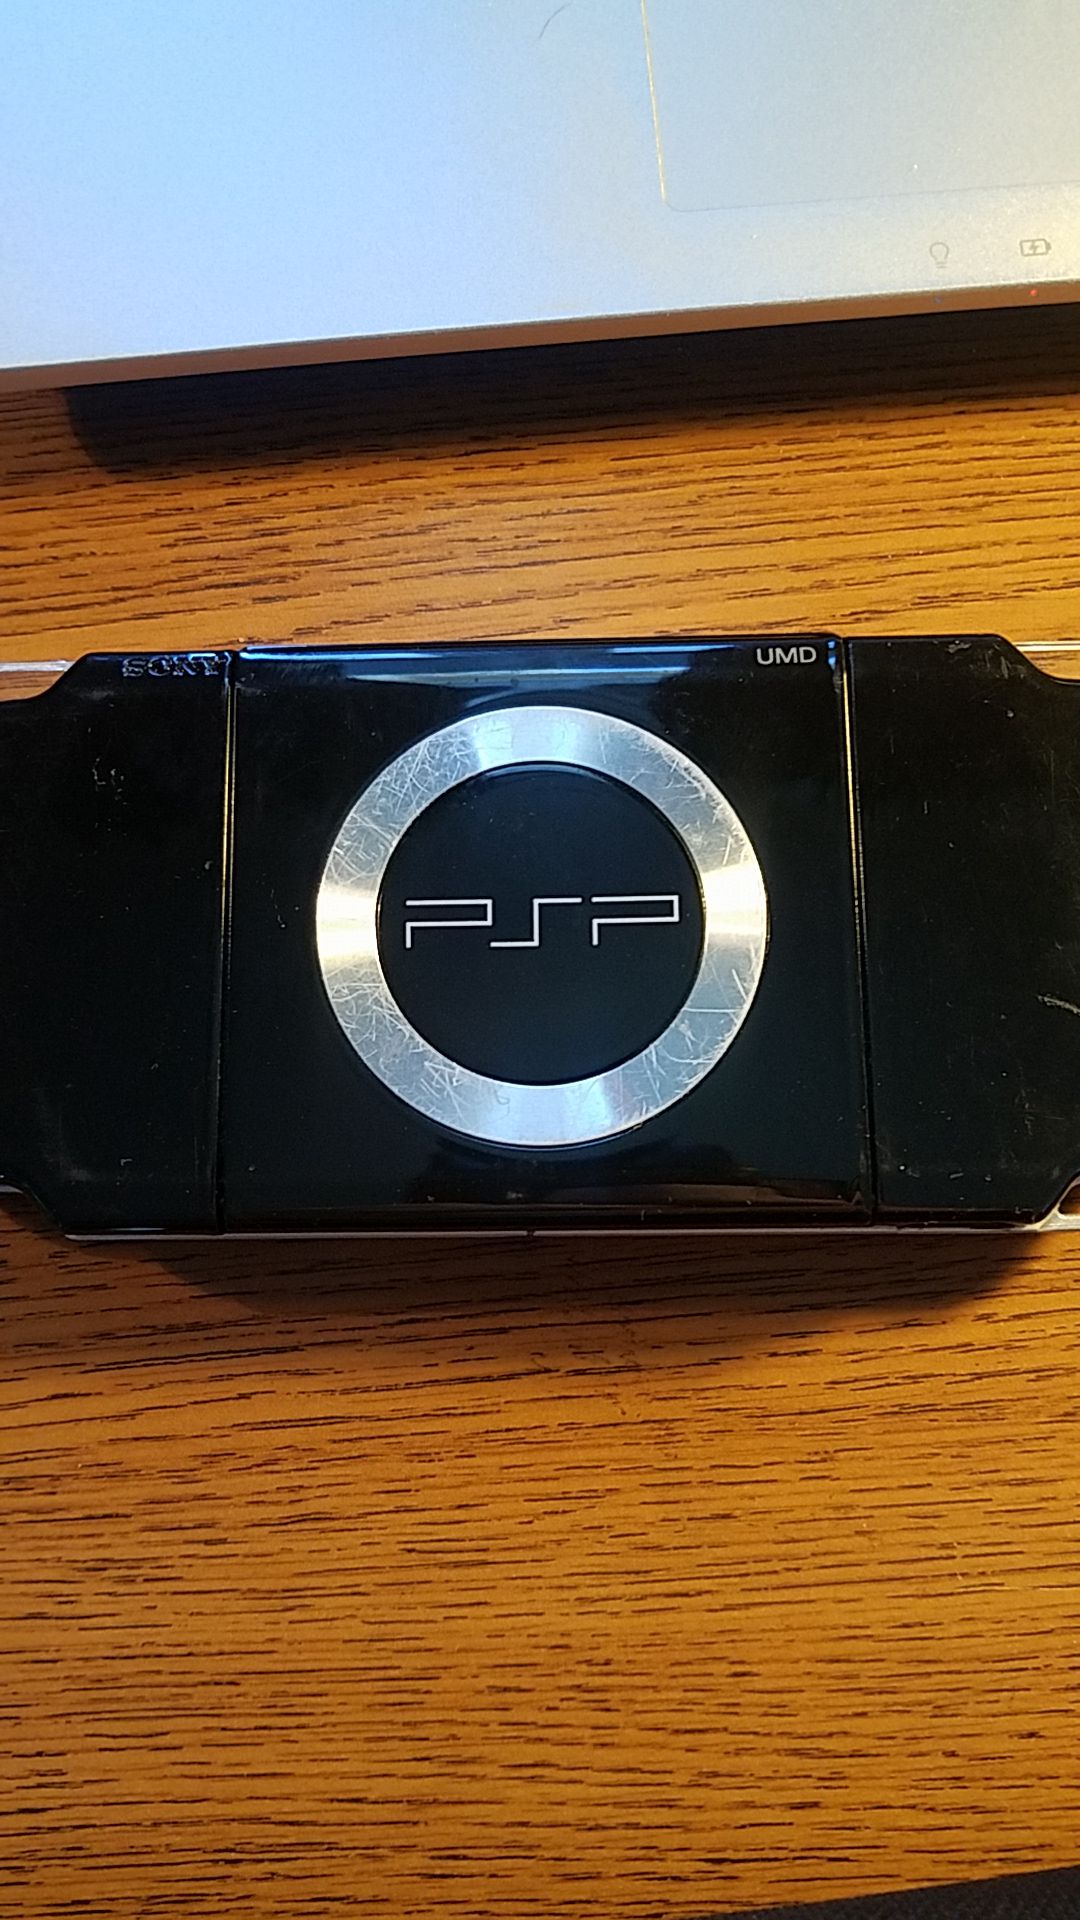 PSP I Bought from offerup had an interesting background : r/PSP